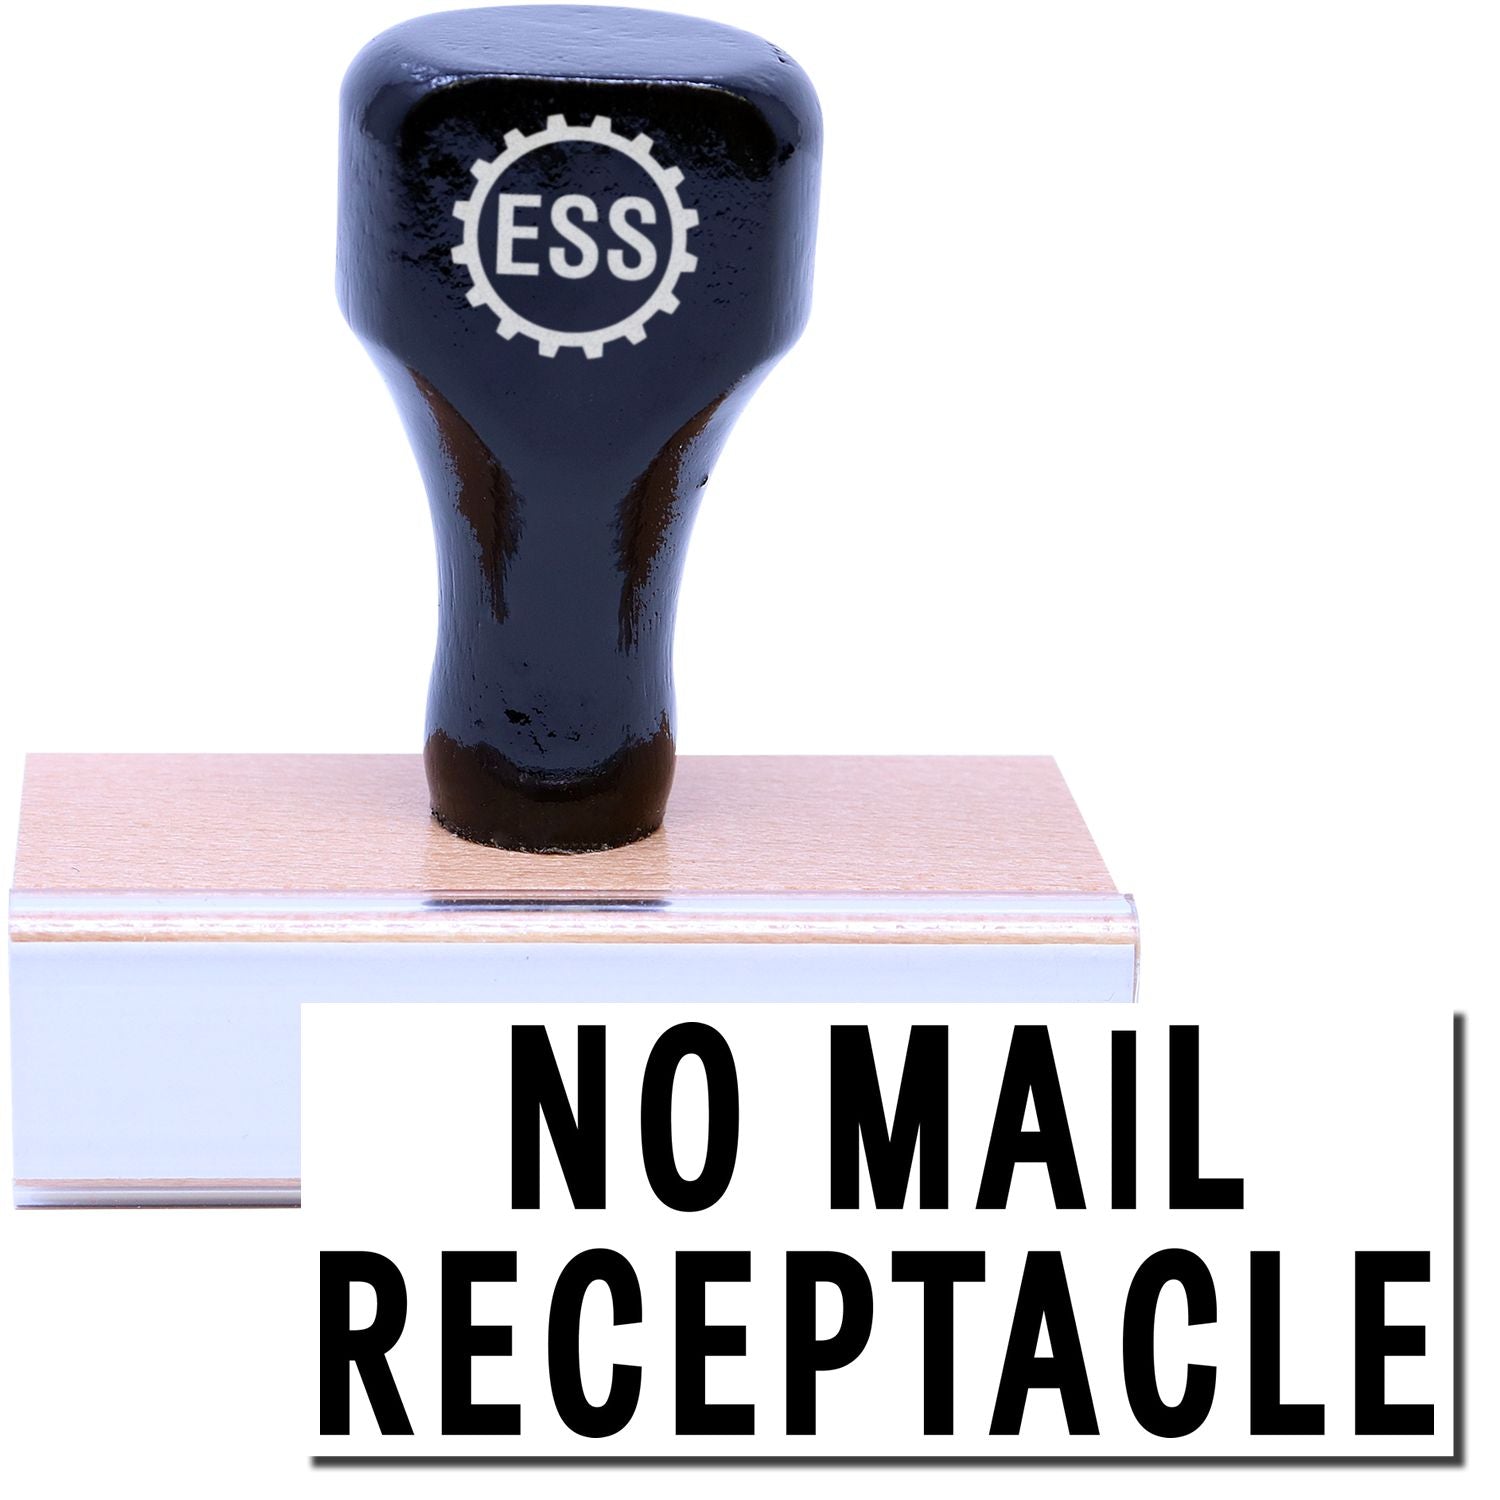 A stock office rubber stamp with a stamped image showing how the text "NO MAIL RECEPTACLE" is displayed after stamping.